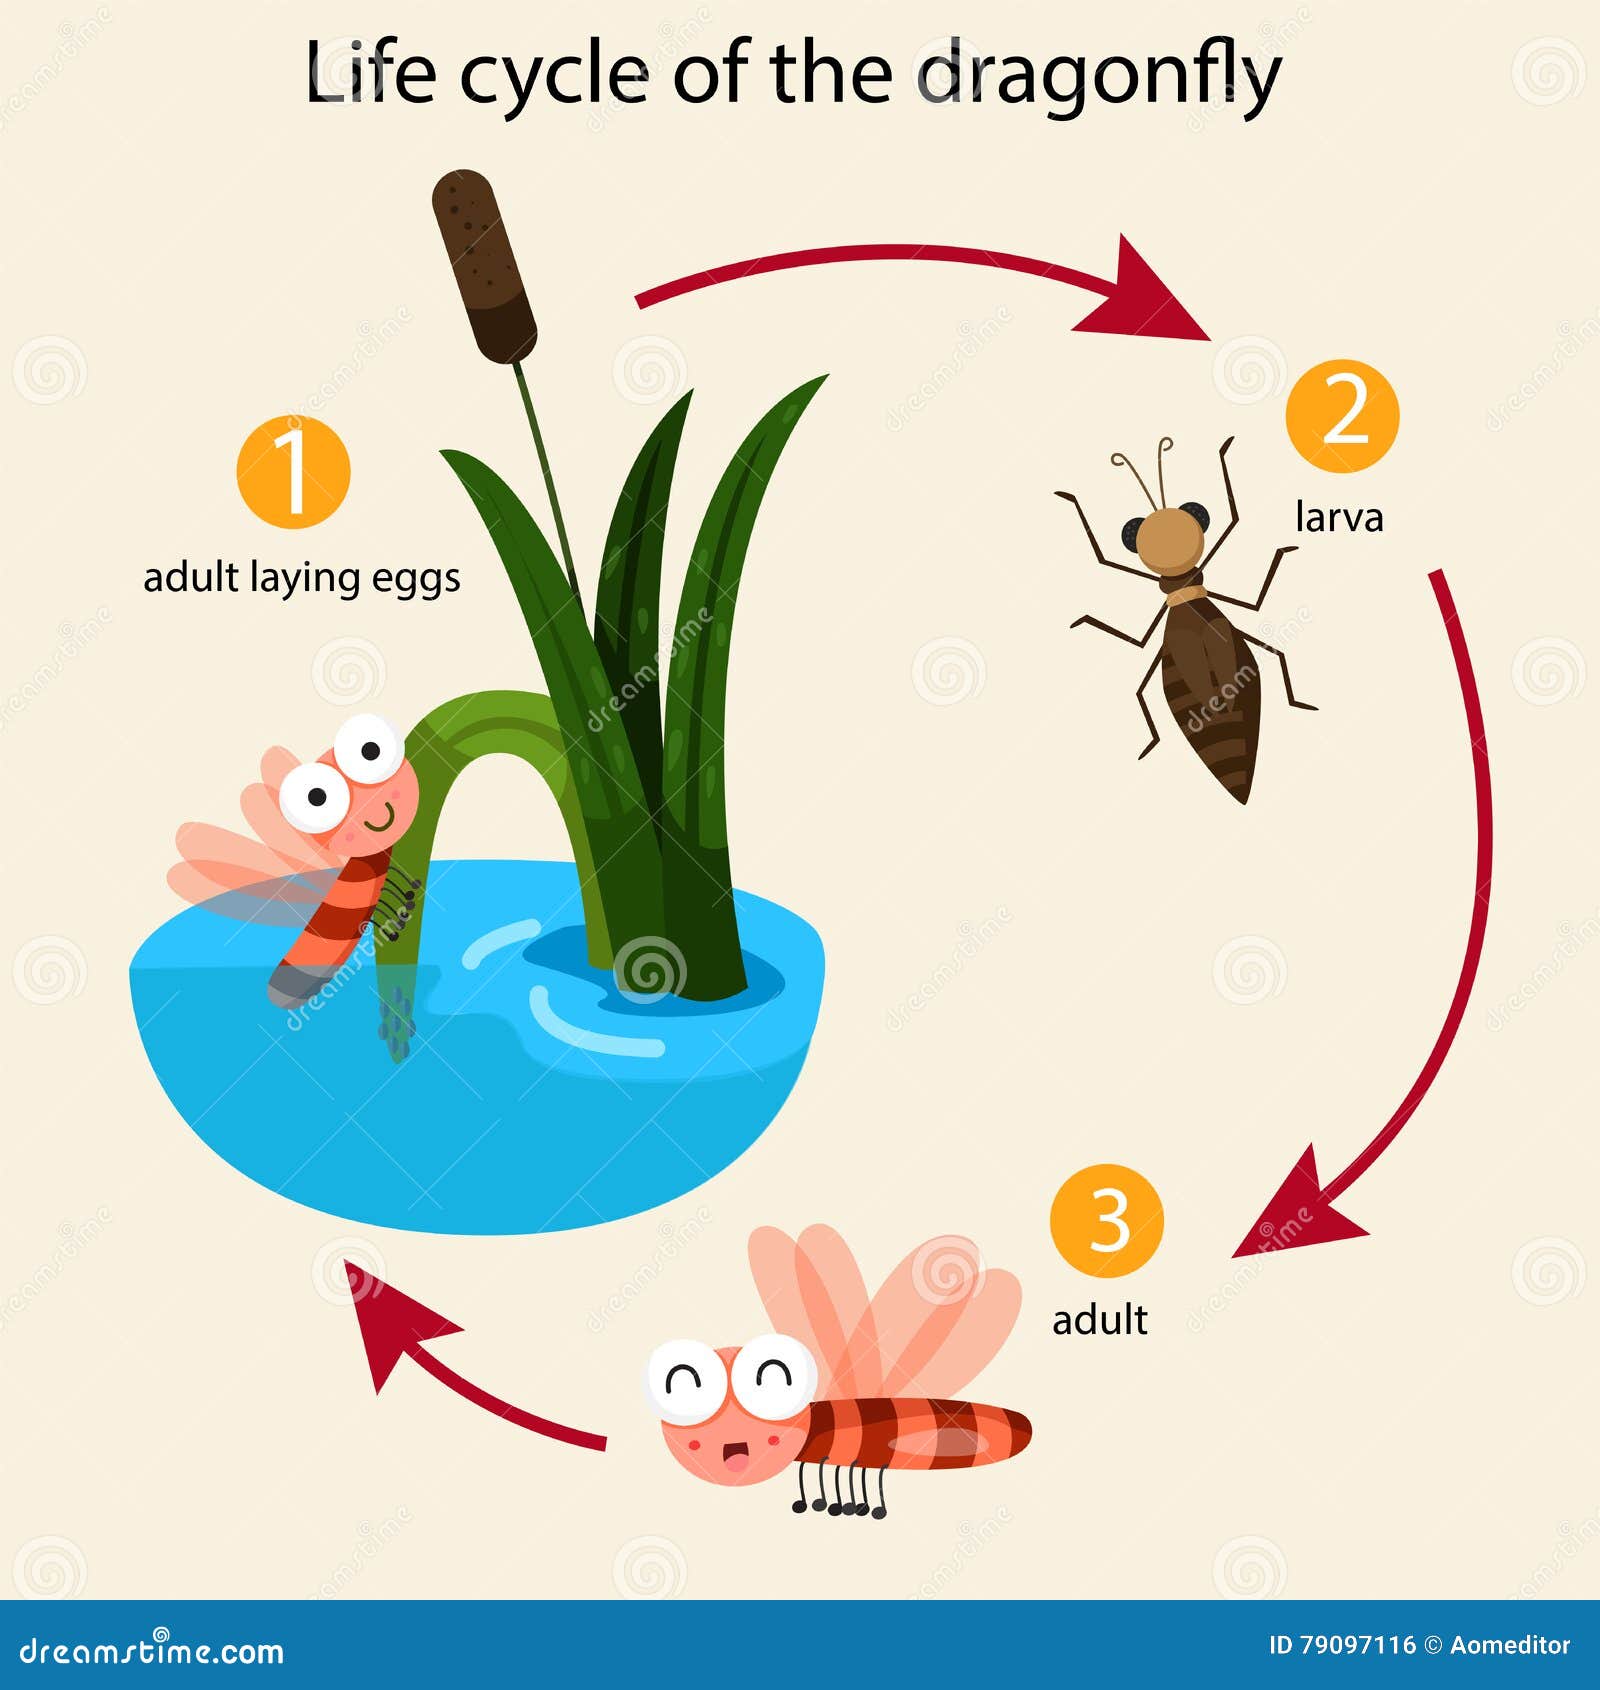 illustrator life cycle dragonfly education 79097116